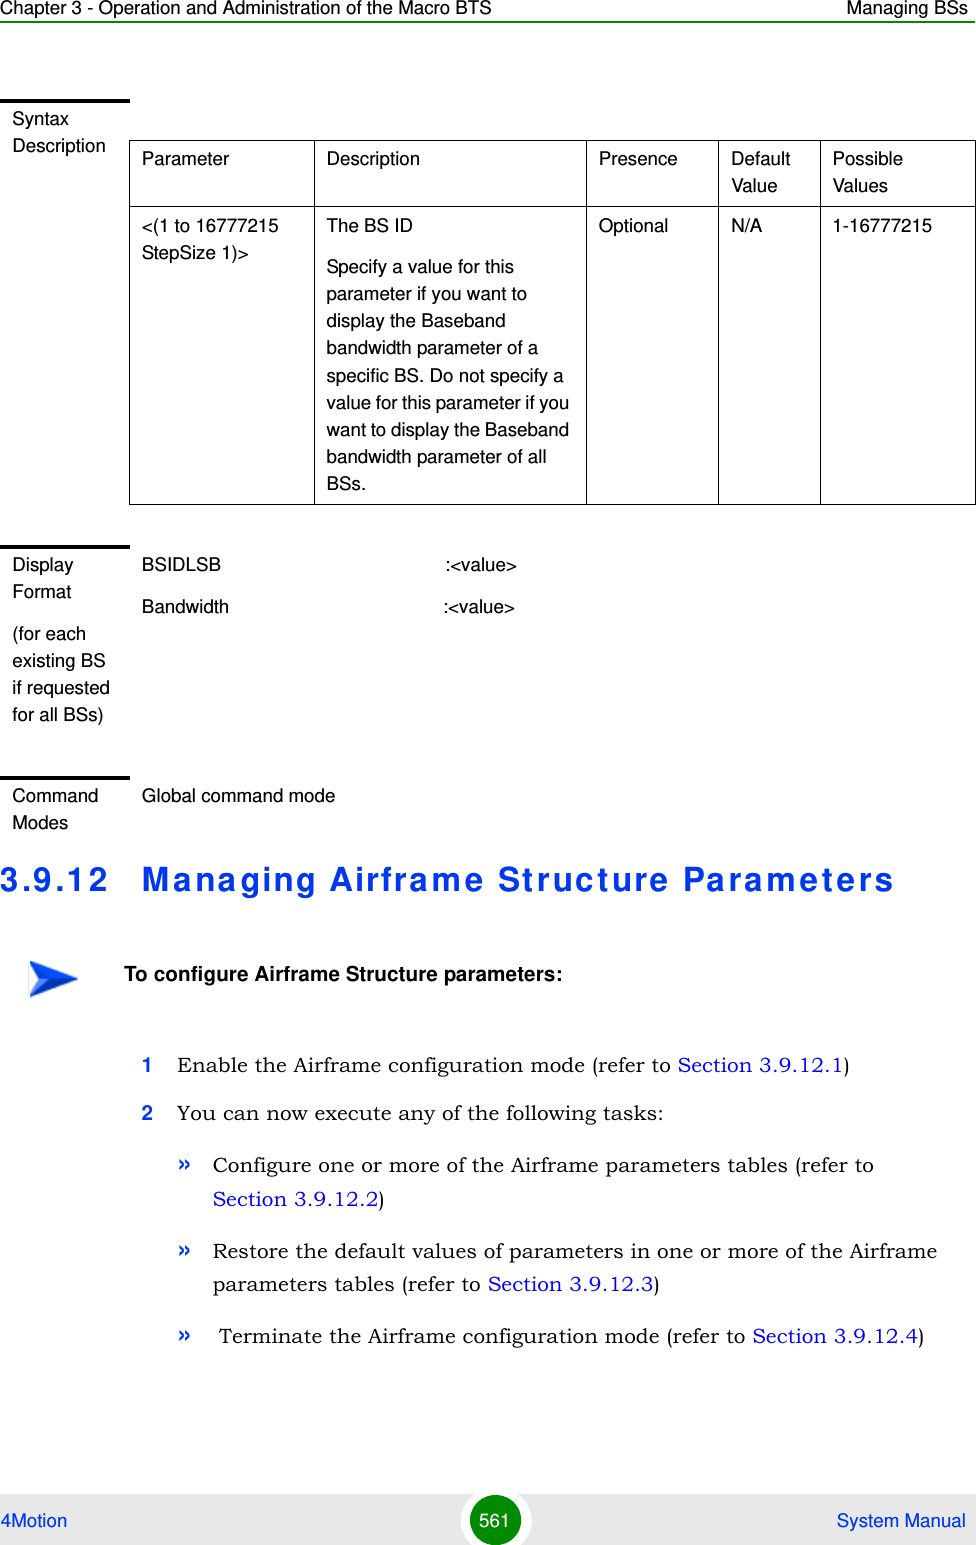 Chapter 3 - Operation and Administration of the Macro BTS Managing BSs4Motion 561  System Manual3.9 .12 Managing Airframe Structure Pa ra meters1Enable the Airframe configuration mode (refer to Section 3.9.12.1)2You can now execute any of the following tasks:»Configure one or more of the Airframe parameters tables (refer to Section 3.9.12.2)»Restore the default values of parameters in one or more of the Airframe parameters tables (refer to Section 3.9.12.3)» Terminate the Airframe configuration mode (refer to Section 3.9.12.4)Syntax Description Parameter Description Presence Default ValuePossible Values&lt;(1 to 16777215 StepSize 1)&gt;The BS ID Specify a value for this parameter if you want to display the Baseband bandwidth parameter of a specific BS. Do not specify a value for this parameter if you want to display the Baseband bandwidth parameter of all BSs.Optional N/A 1-16777215Display Format(for each existing BS if requested for all BSs)BSIDLSB                                           :&lt;value&gt;Bandwidth                                         :&lt;value&gt;Command ModesGlobal command modeTo configure Airframe Structure parameters: